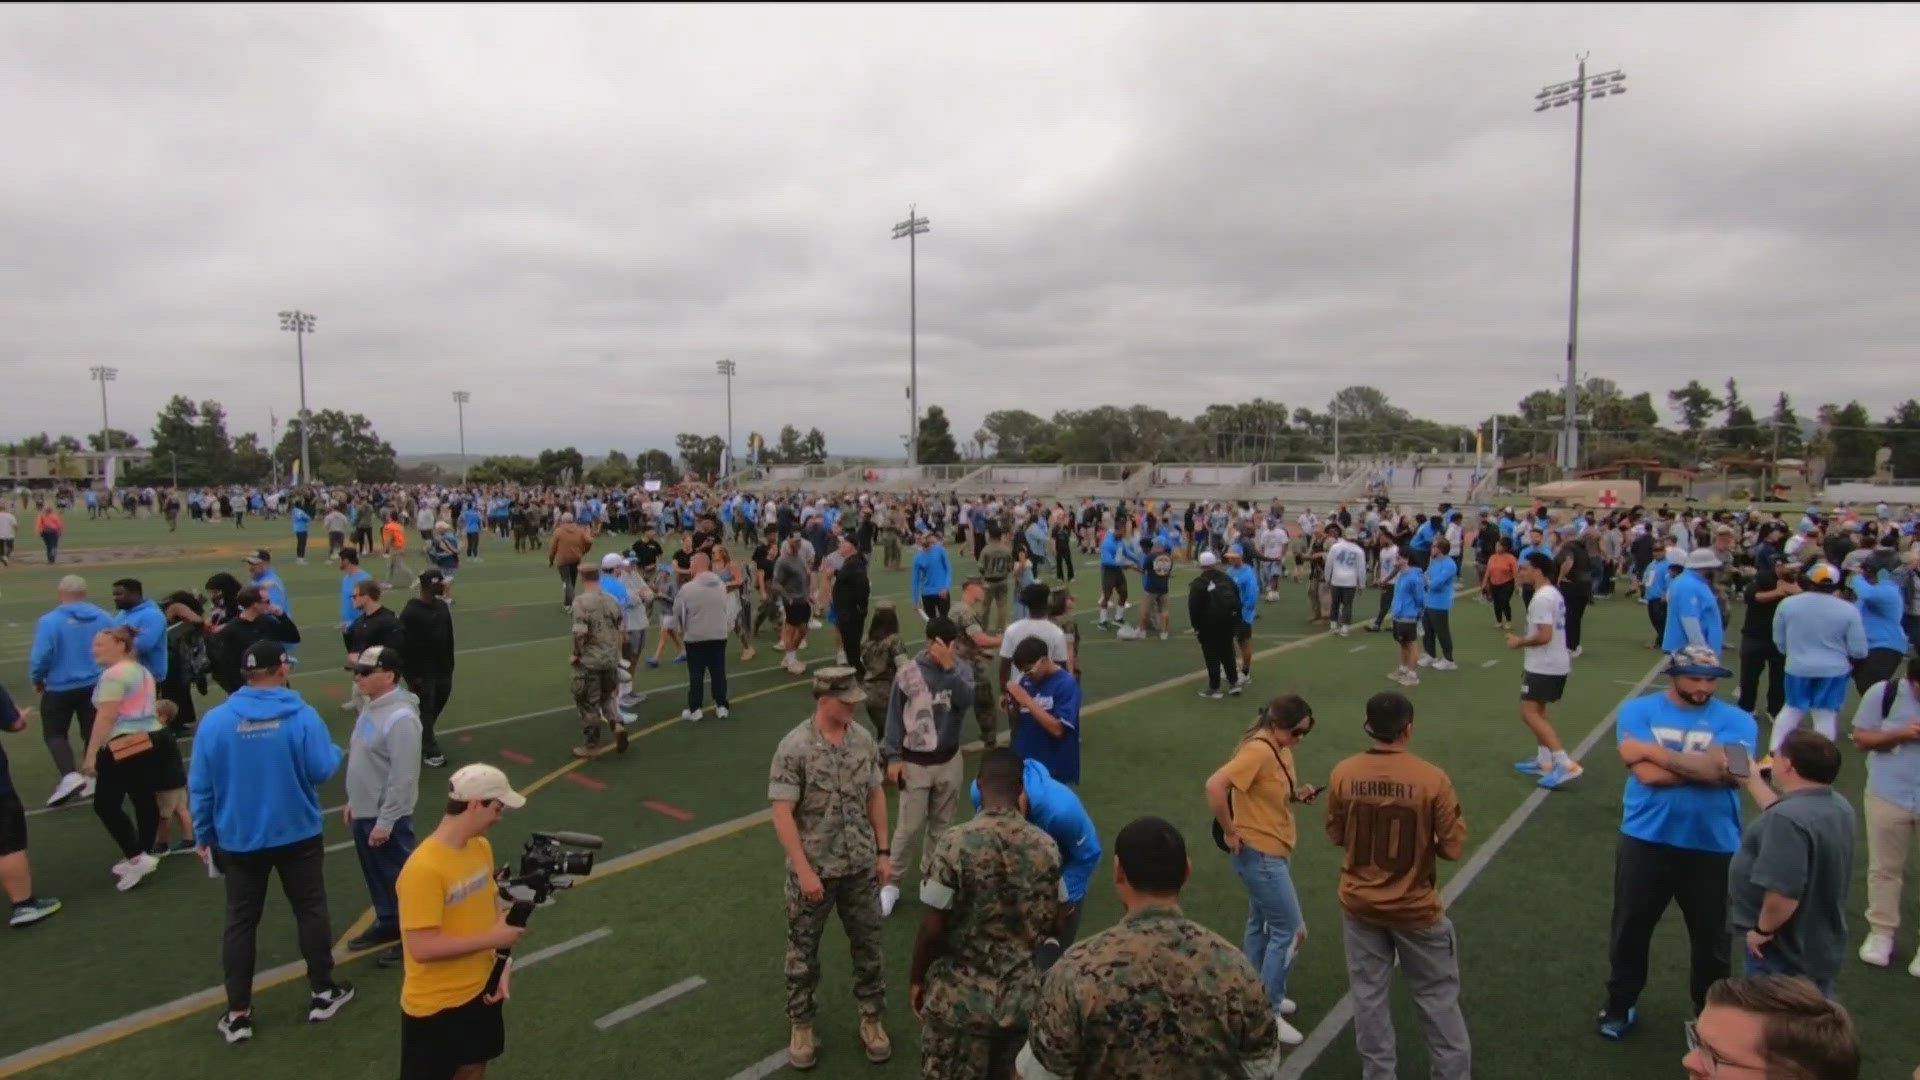 The Chargers returned to San Diego County as they practiced alongside military service members.